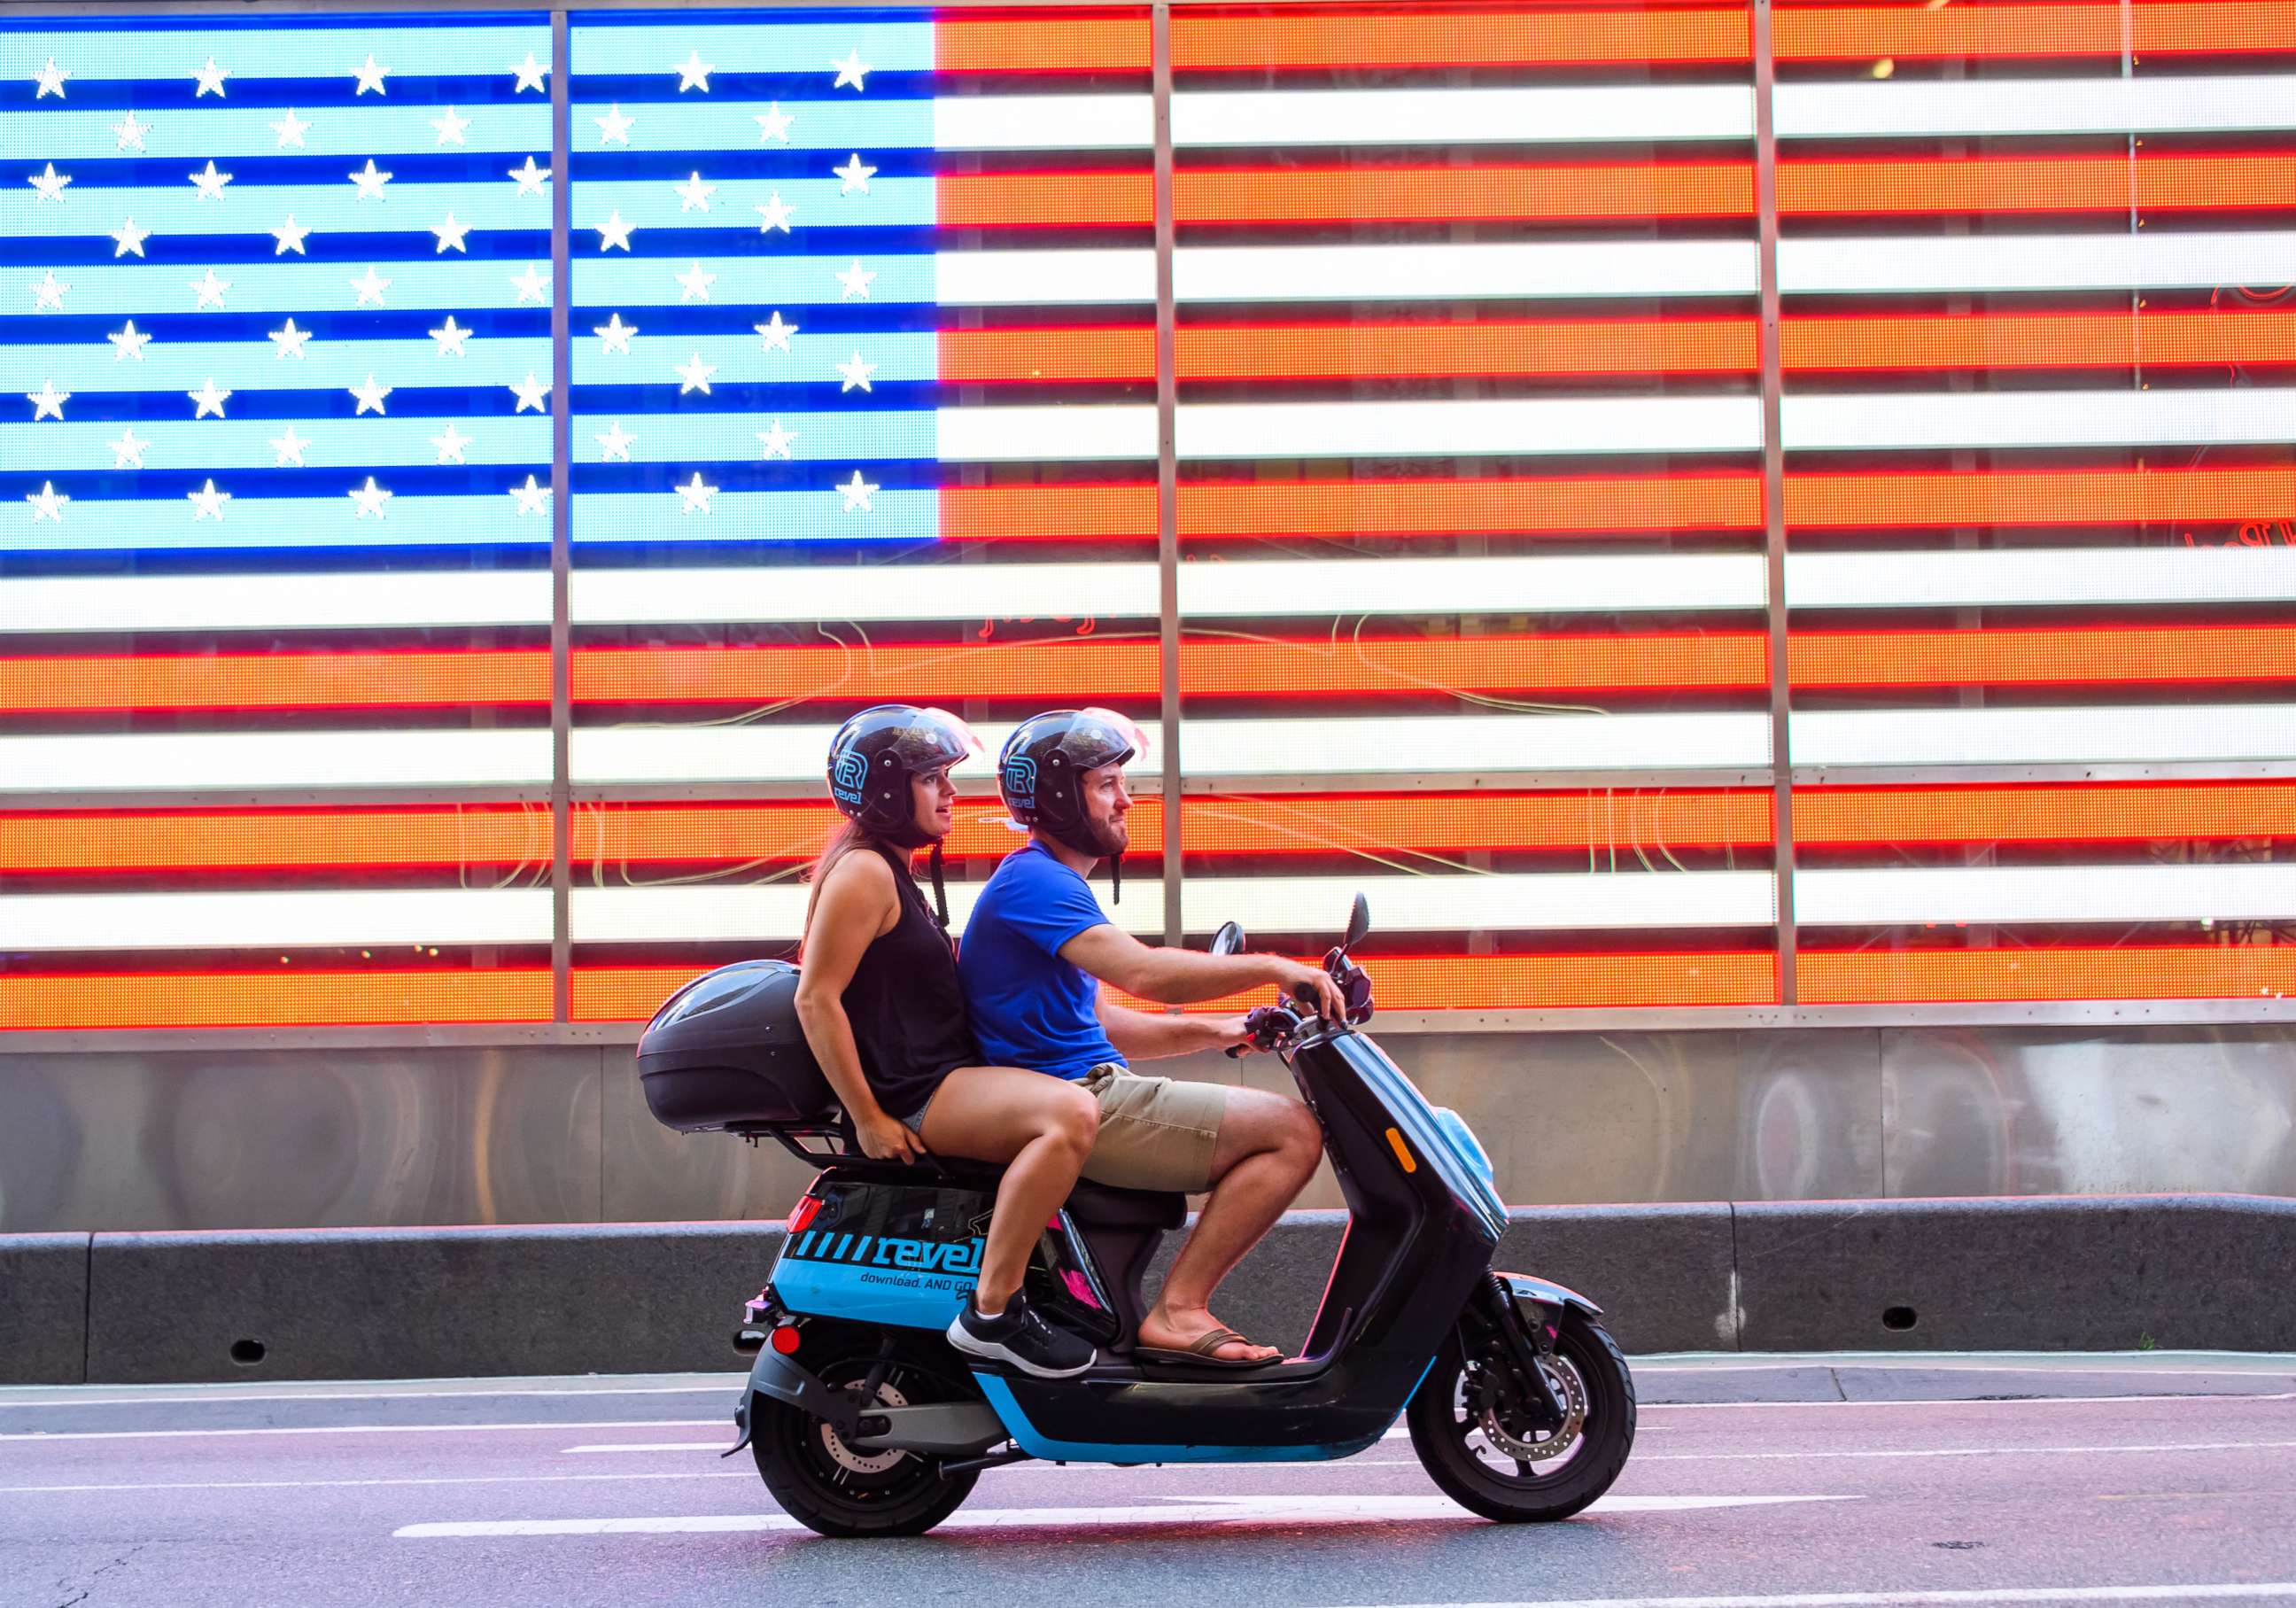 PHOTO: People ride a Revel scooter in Times Square on July 14, 2020 in New York City.